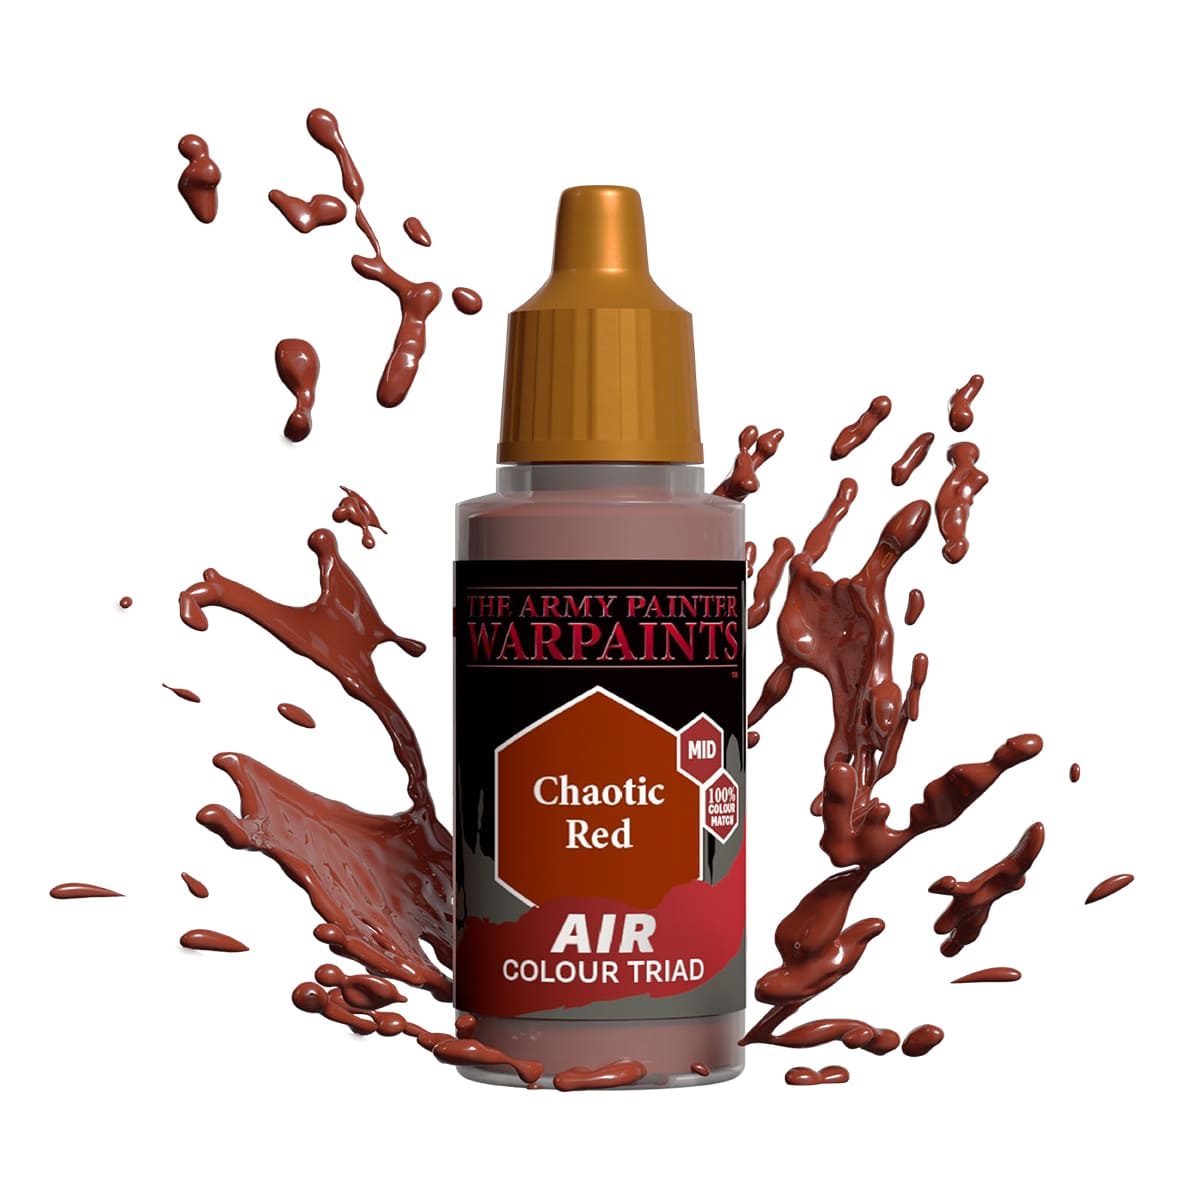 Army Painter Paint: Air Chaotic Red